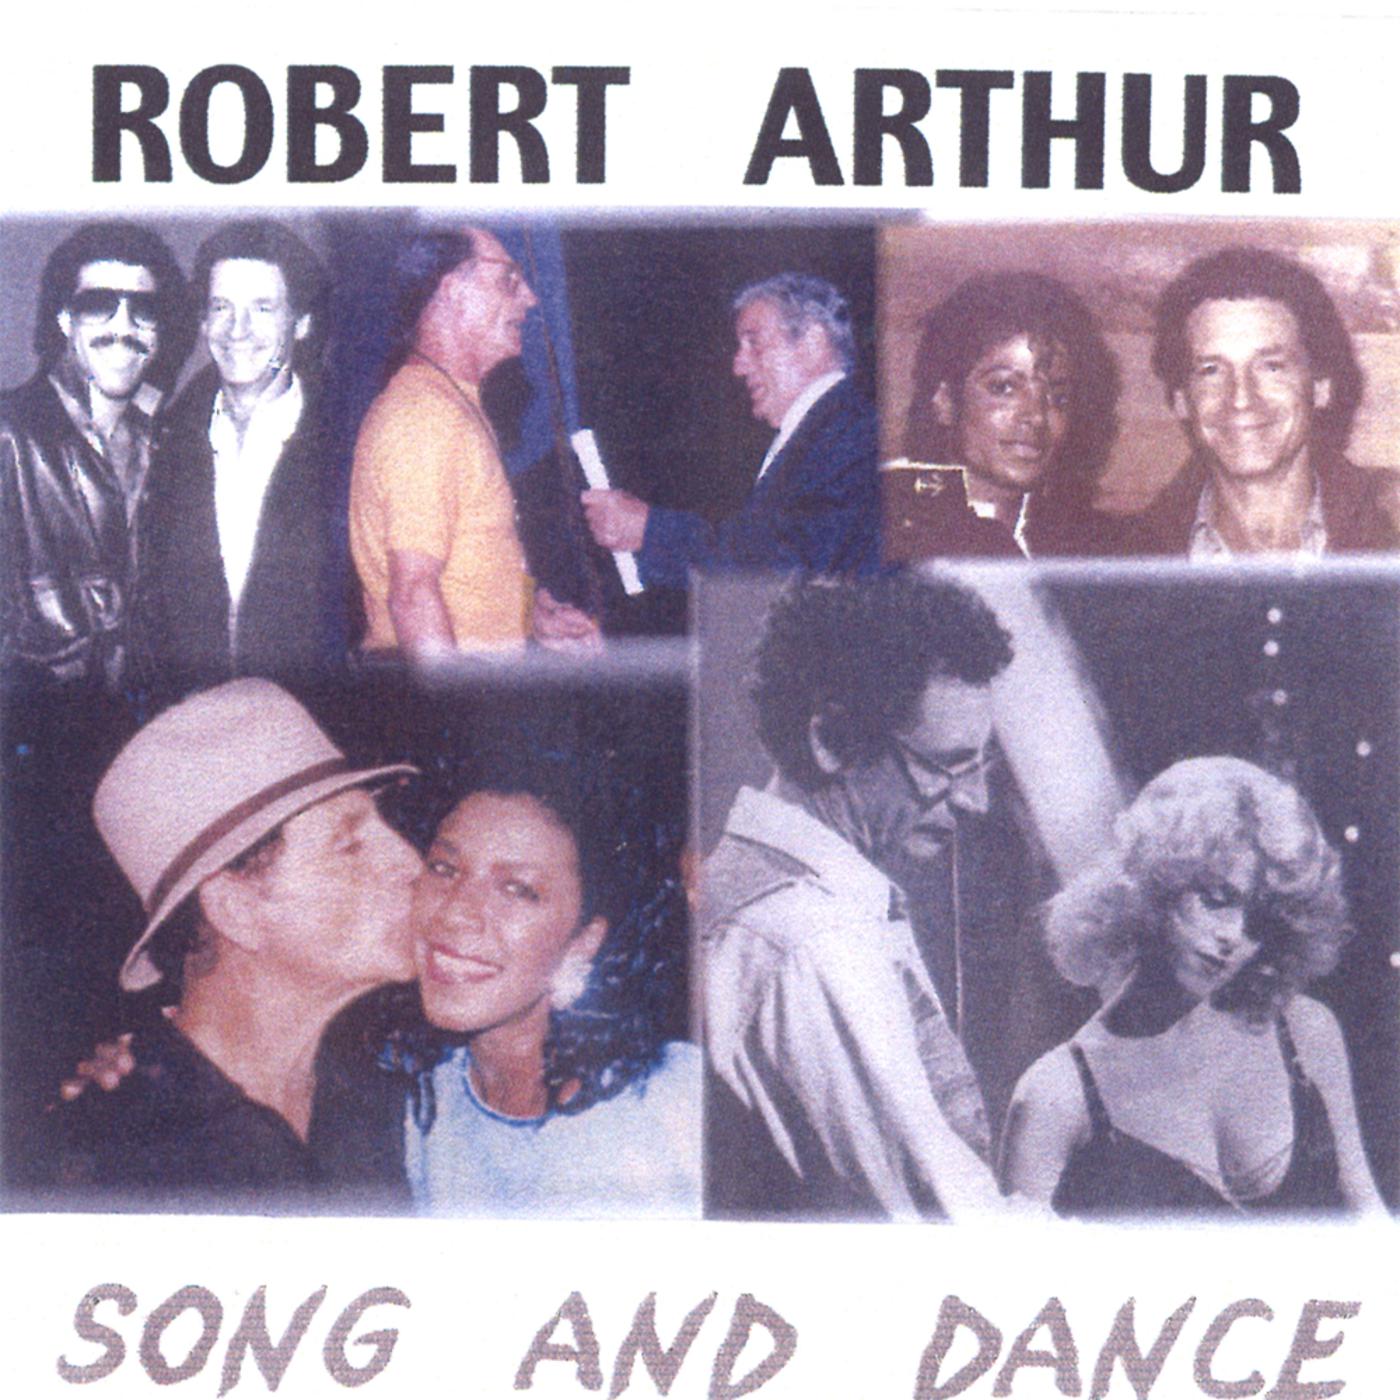 Robert Arthur - The Sound Of A Band Tuning Up